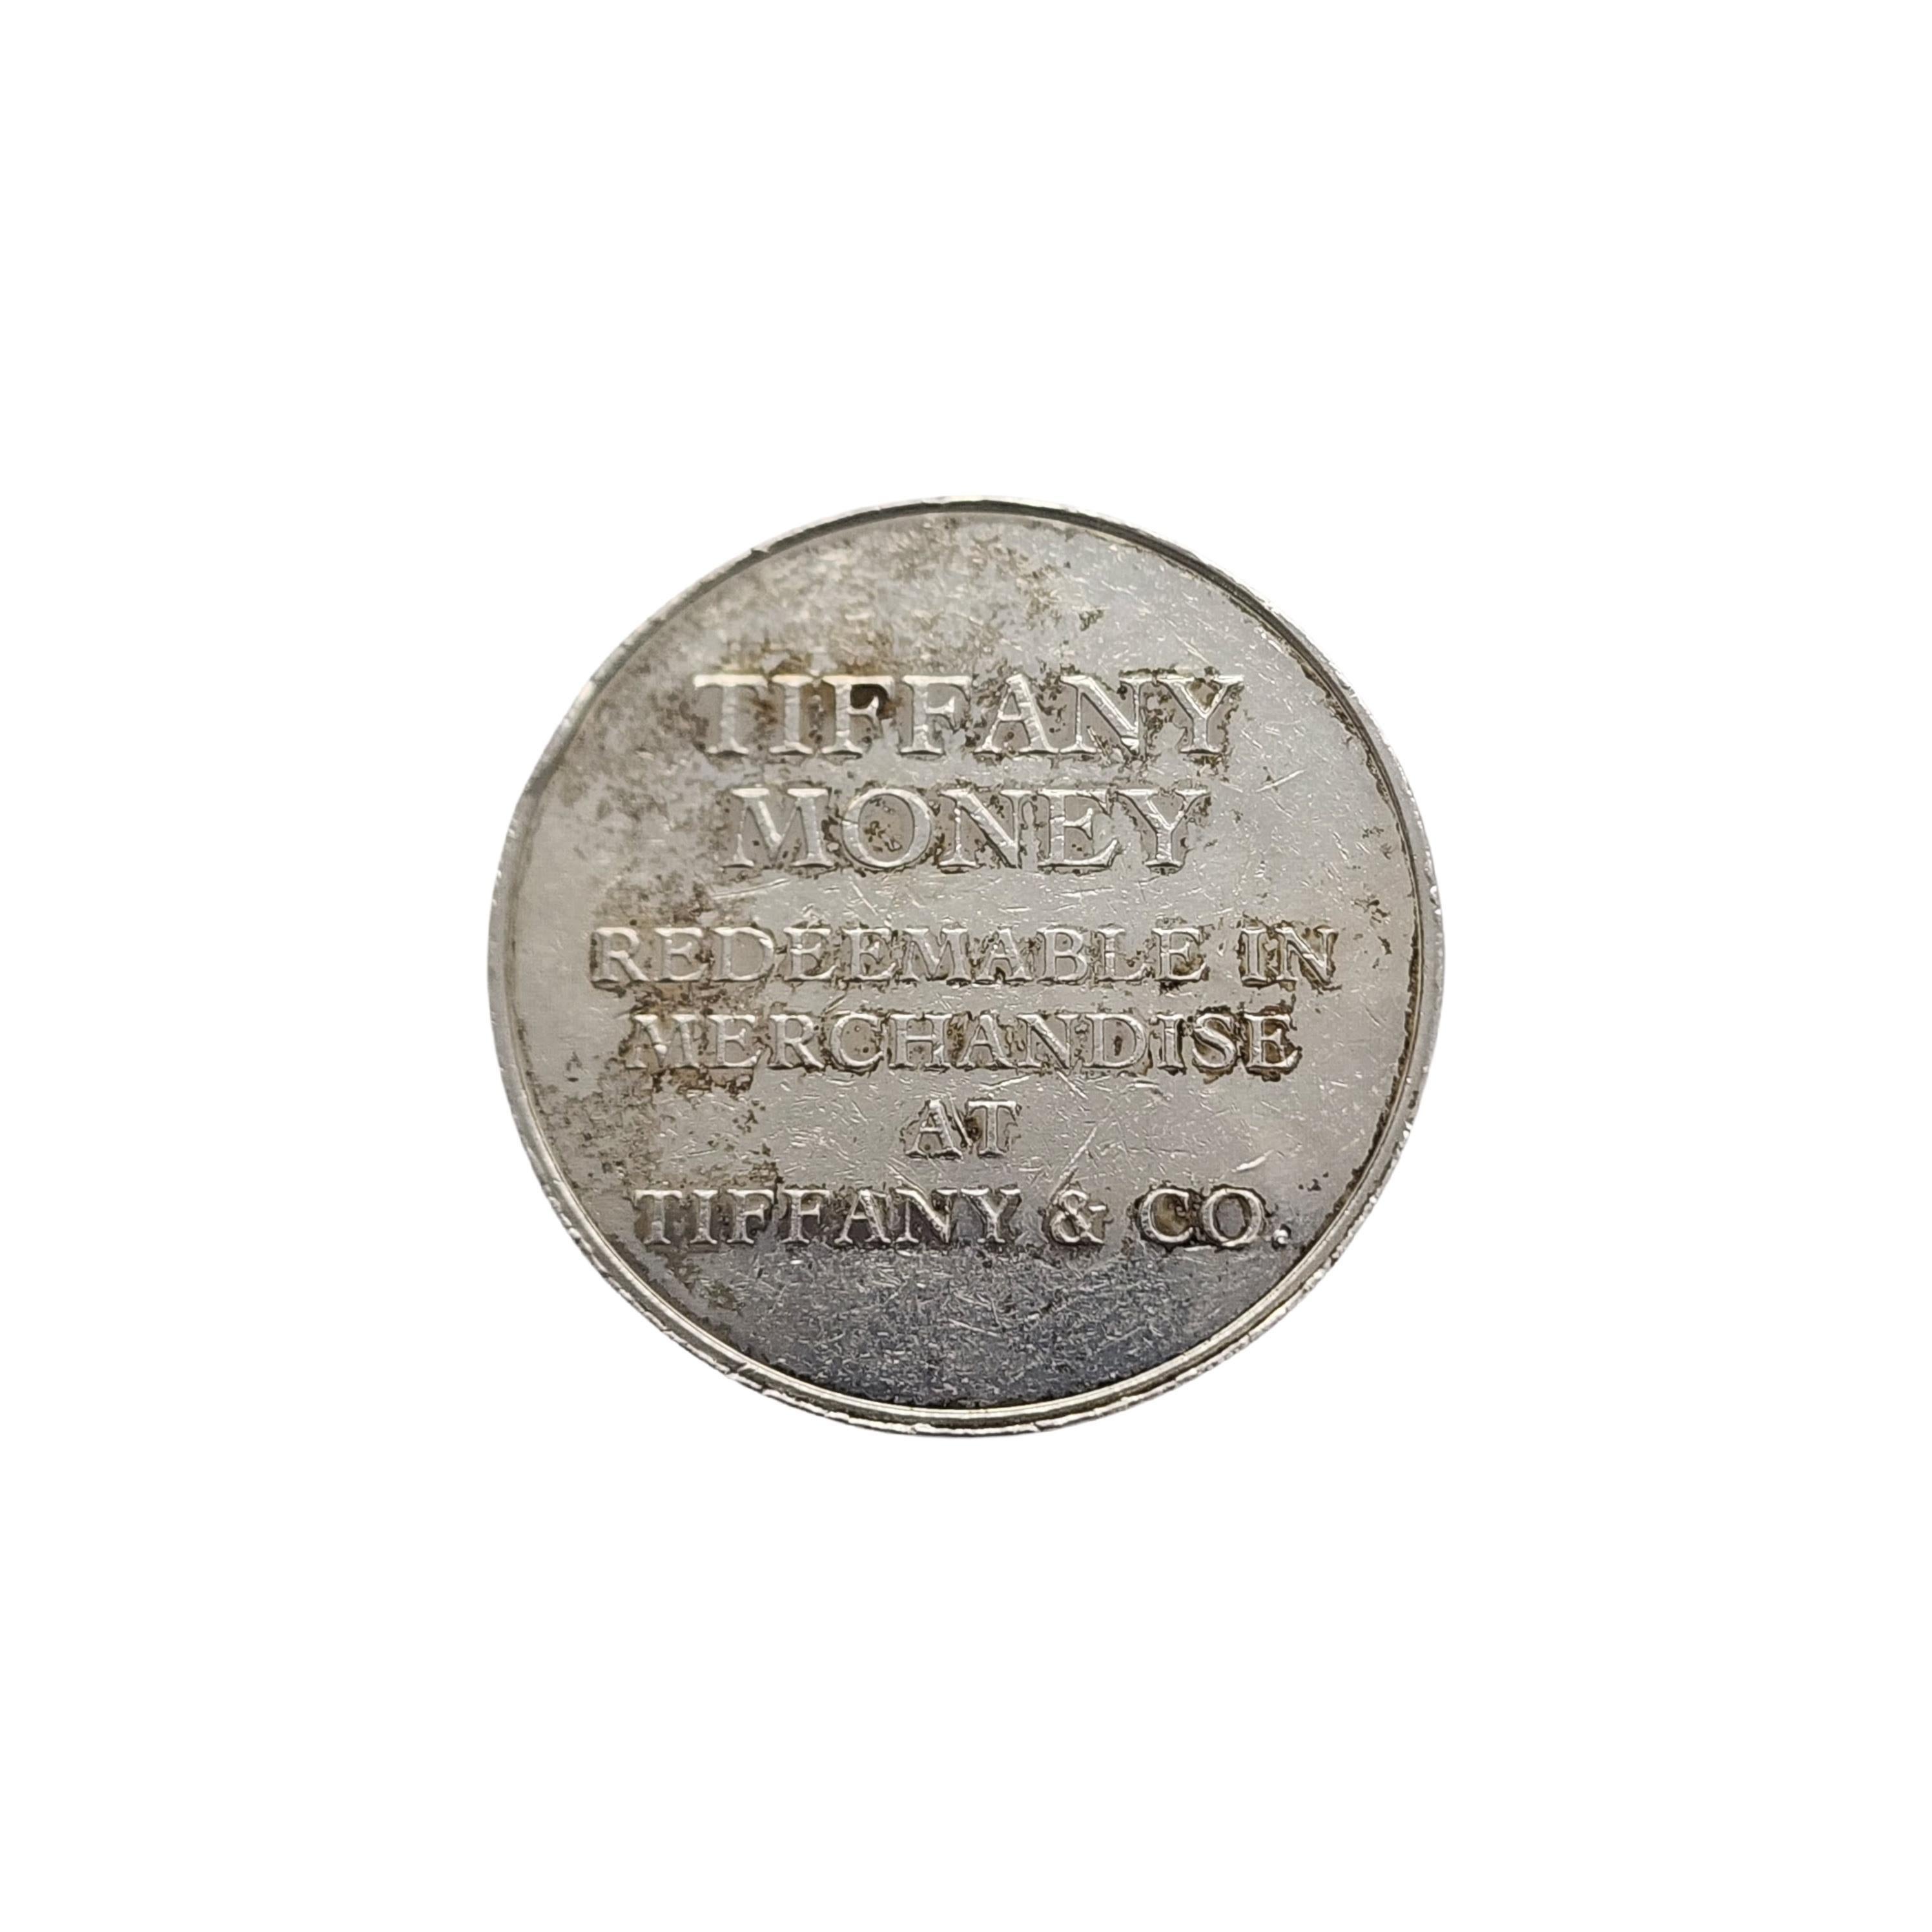 Tiffany & Co sterling silver money coin.

A $25 sterling silver money coin from Tiffany & Co.

Measures approx 1 3/8